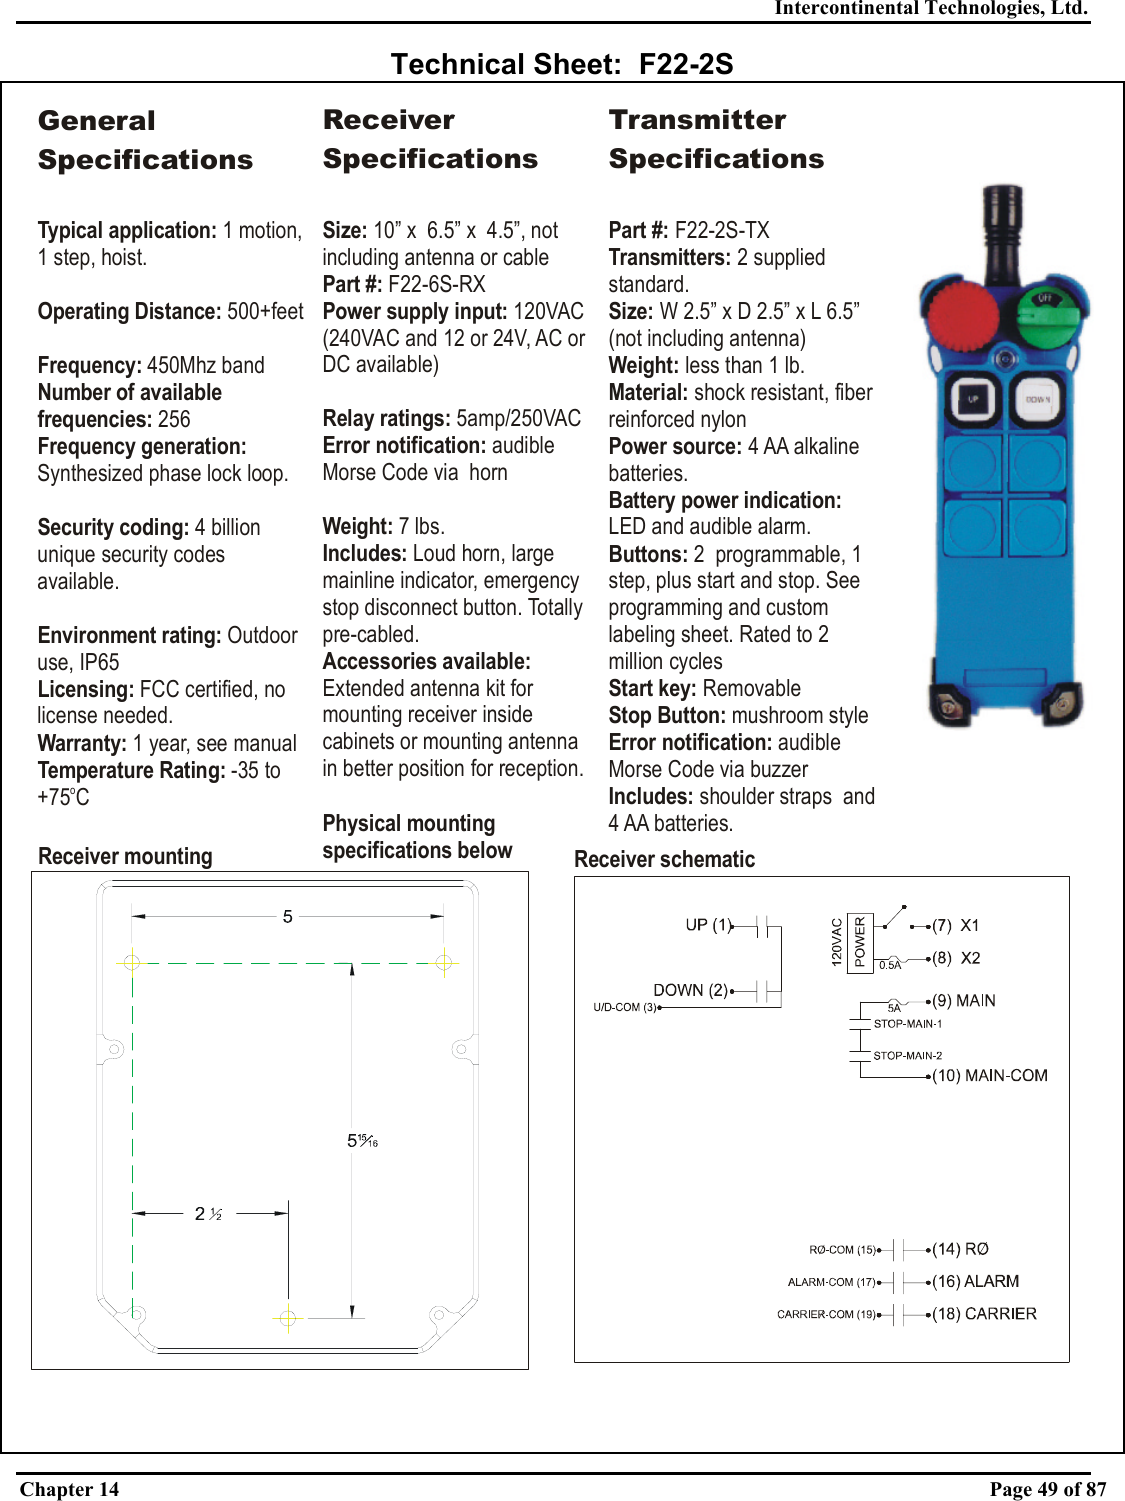 Intercontinental Technologies, Ltd. Chapter 14    Page 49 of 87  Technical Sheet:  F22-2S Receiver mounting Receiver schematicGeneral SpecificationsTypical application: Operating Distance:Frequency: Number of available frequencies:Frequency generation: Security coding: Environment rating: Licensing:Warranty:Temperature Rating: 1 motion, 1 step, hoist.  500+feet450Mhz band 256Synthesized phase lock loop.4 billion unique security codes available.Outdoor use, IP65 FCC certified, no license needed. 1 year, see manual-35 to +75 CoReceiver SpecificationsSize: 10” x  6.5” x  4.5”, not including antenna or cablePart #:Power supply input: Relay ratings: Error notification: Weight: Includes: Accessories available: Physical mounting specifications below F22-6S-RX120VAC (240VAC and 12 or 24V, AC or DC available)5amp/250VACaudible Morse Code via  horn7 lbs.Loud horn, large mainline indicator, emergency stop disconnect button. Totally pre-cabled.Extended antenna kit for mounting receiver inside cabinets or mounting antenna in better position for reception.Transmitter SpecificationsPart #: Transmitters: Size: Weight:  Material: Power source: Buttons:  Start key: Stop Button: ication: Includes: F22-2S-TX2 supplied standard.W 2.5” x D 2.5” x less than 1 lb.shock resistant, fiber reinforced nylon4 AA alkaline batteries.2  programmable, 1 step, plus start and stop. See programming and custom labeling sheet. Rated to 2 million cyclesRemovablemushroom styleaudible Morse Code via buzzershoulder straps  and 4 AA batteries.L 6.5” (not including antenna)LED and audible alarm.Battery power indication: Error notif 